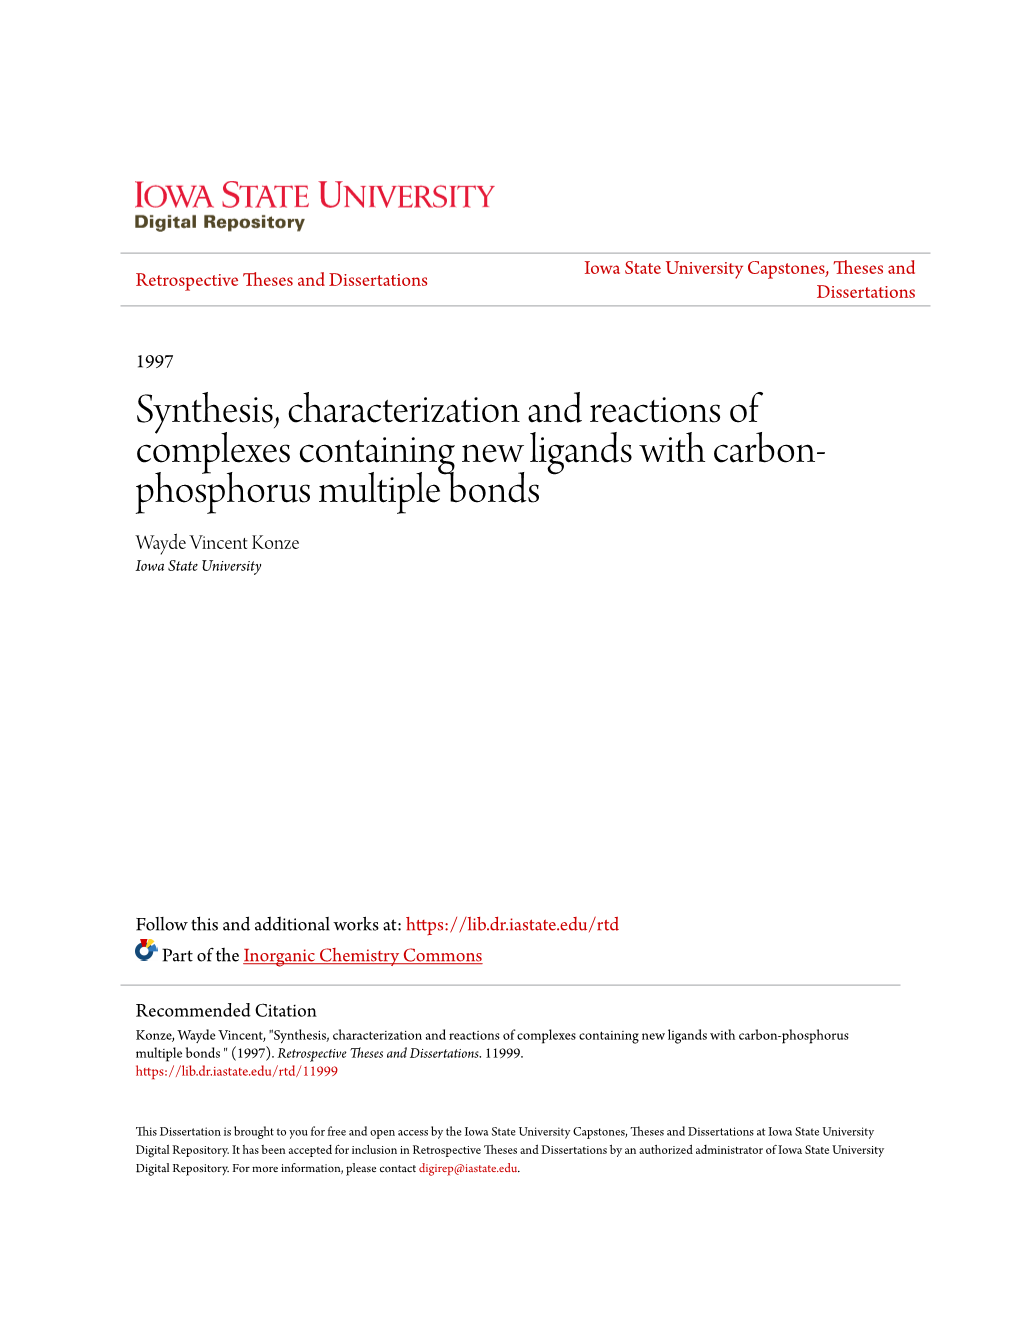 Synthesis, Characterization and Reactions of Complexes Containing New Ligands with Carbon- Phosphorus Multiple Bonds Wayde Vincent Konze Iowa State University